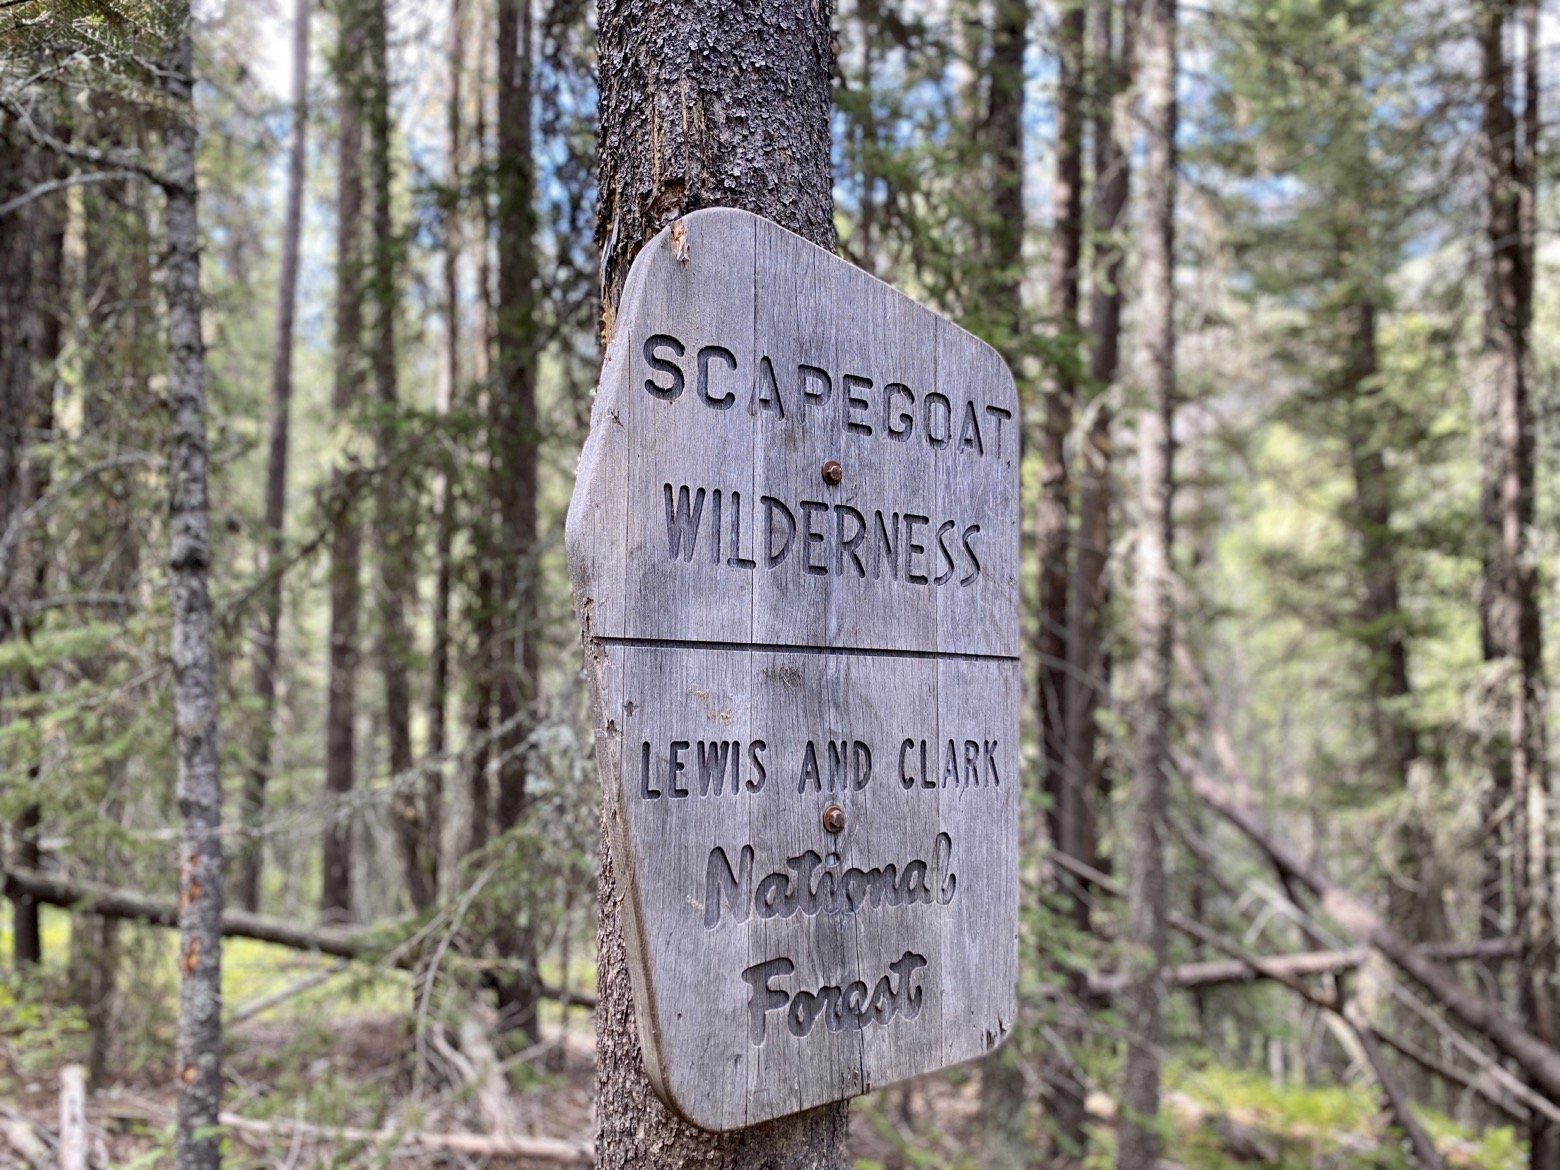 Leaving the Scapegoat Wilderness